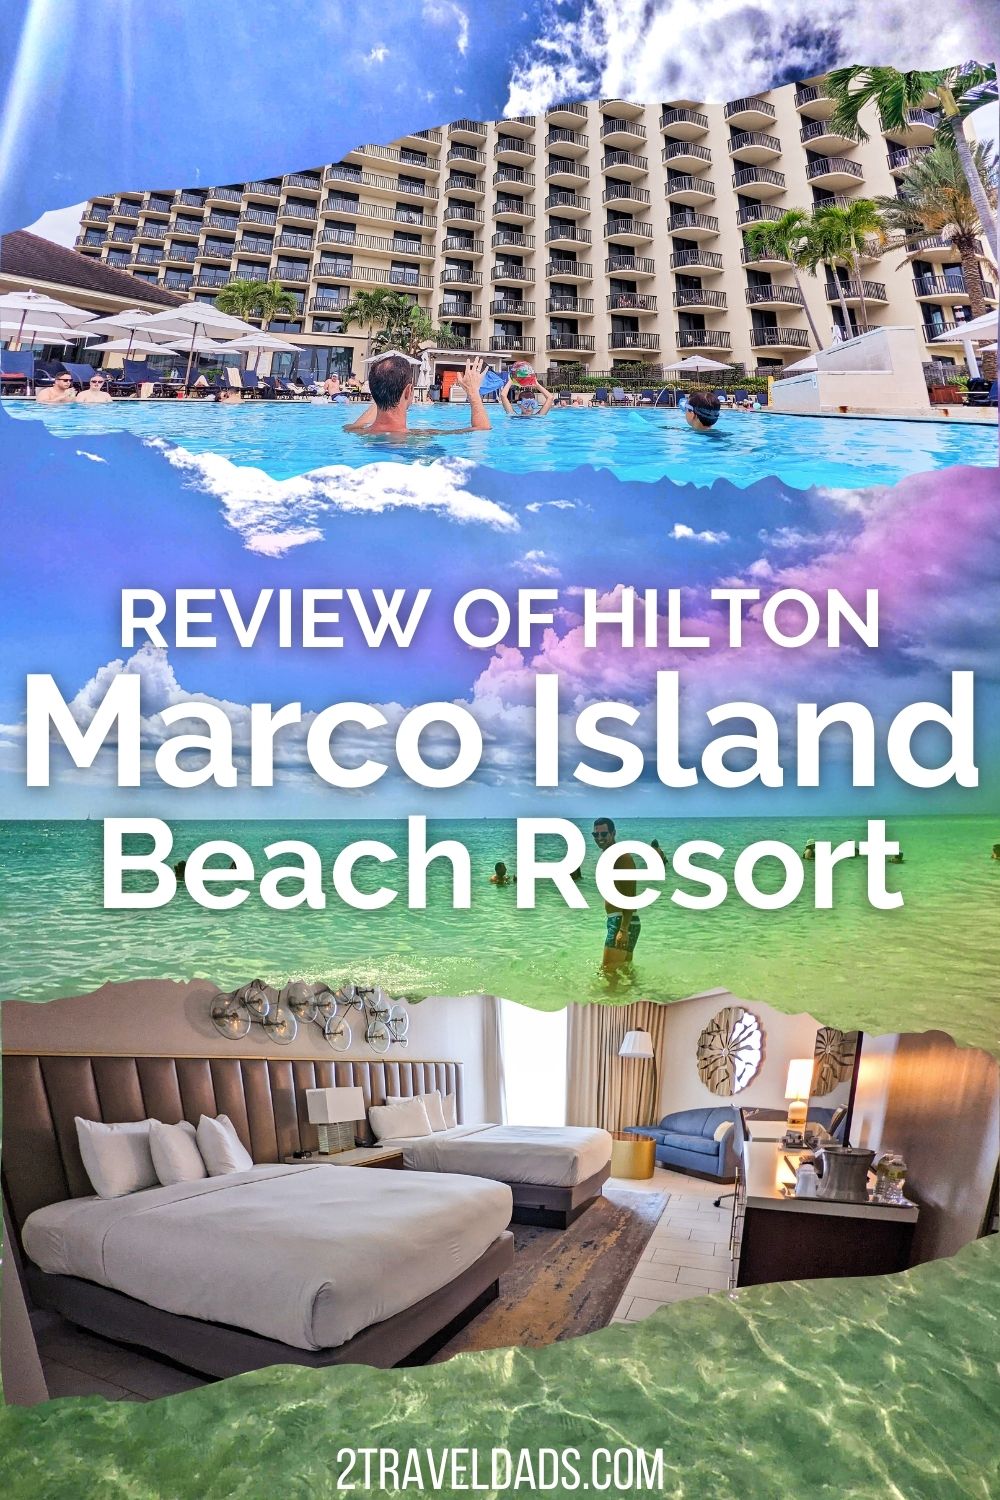 Review of the Hilton Marco Island Beach Resort on the Florida Gulf Coast. Near Everglades National Park and just south of Naples, this hotel is a great pick for a family beach vacation. Full details here!